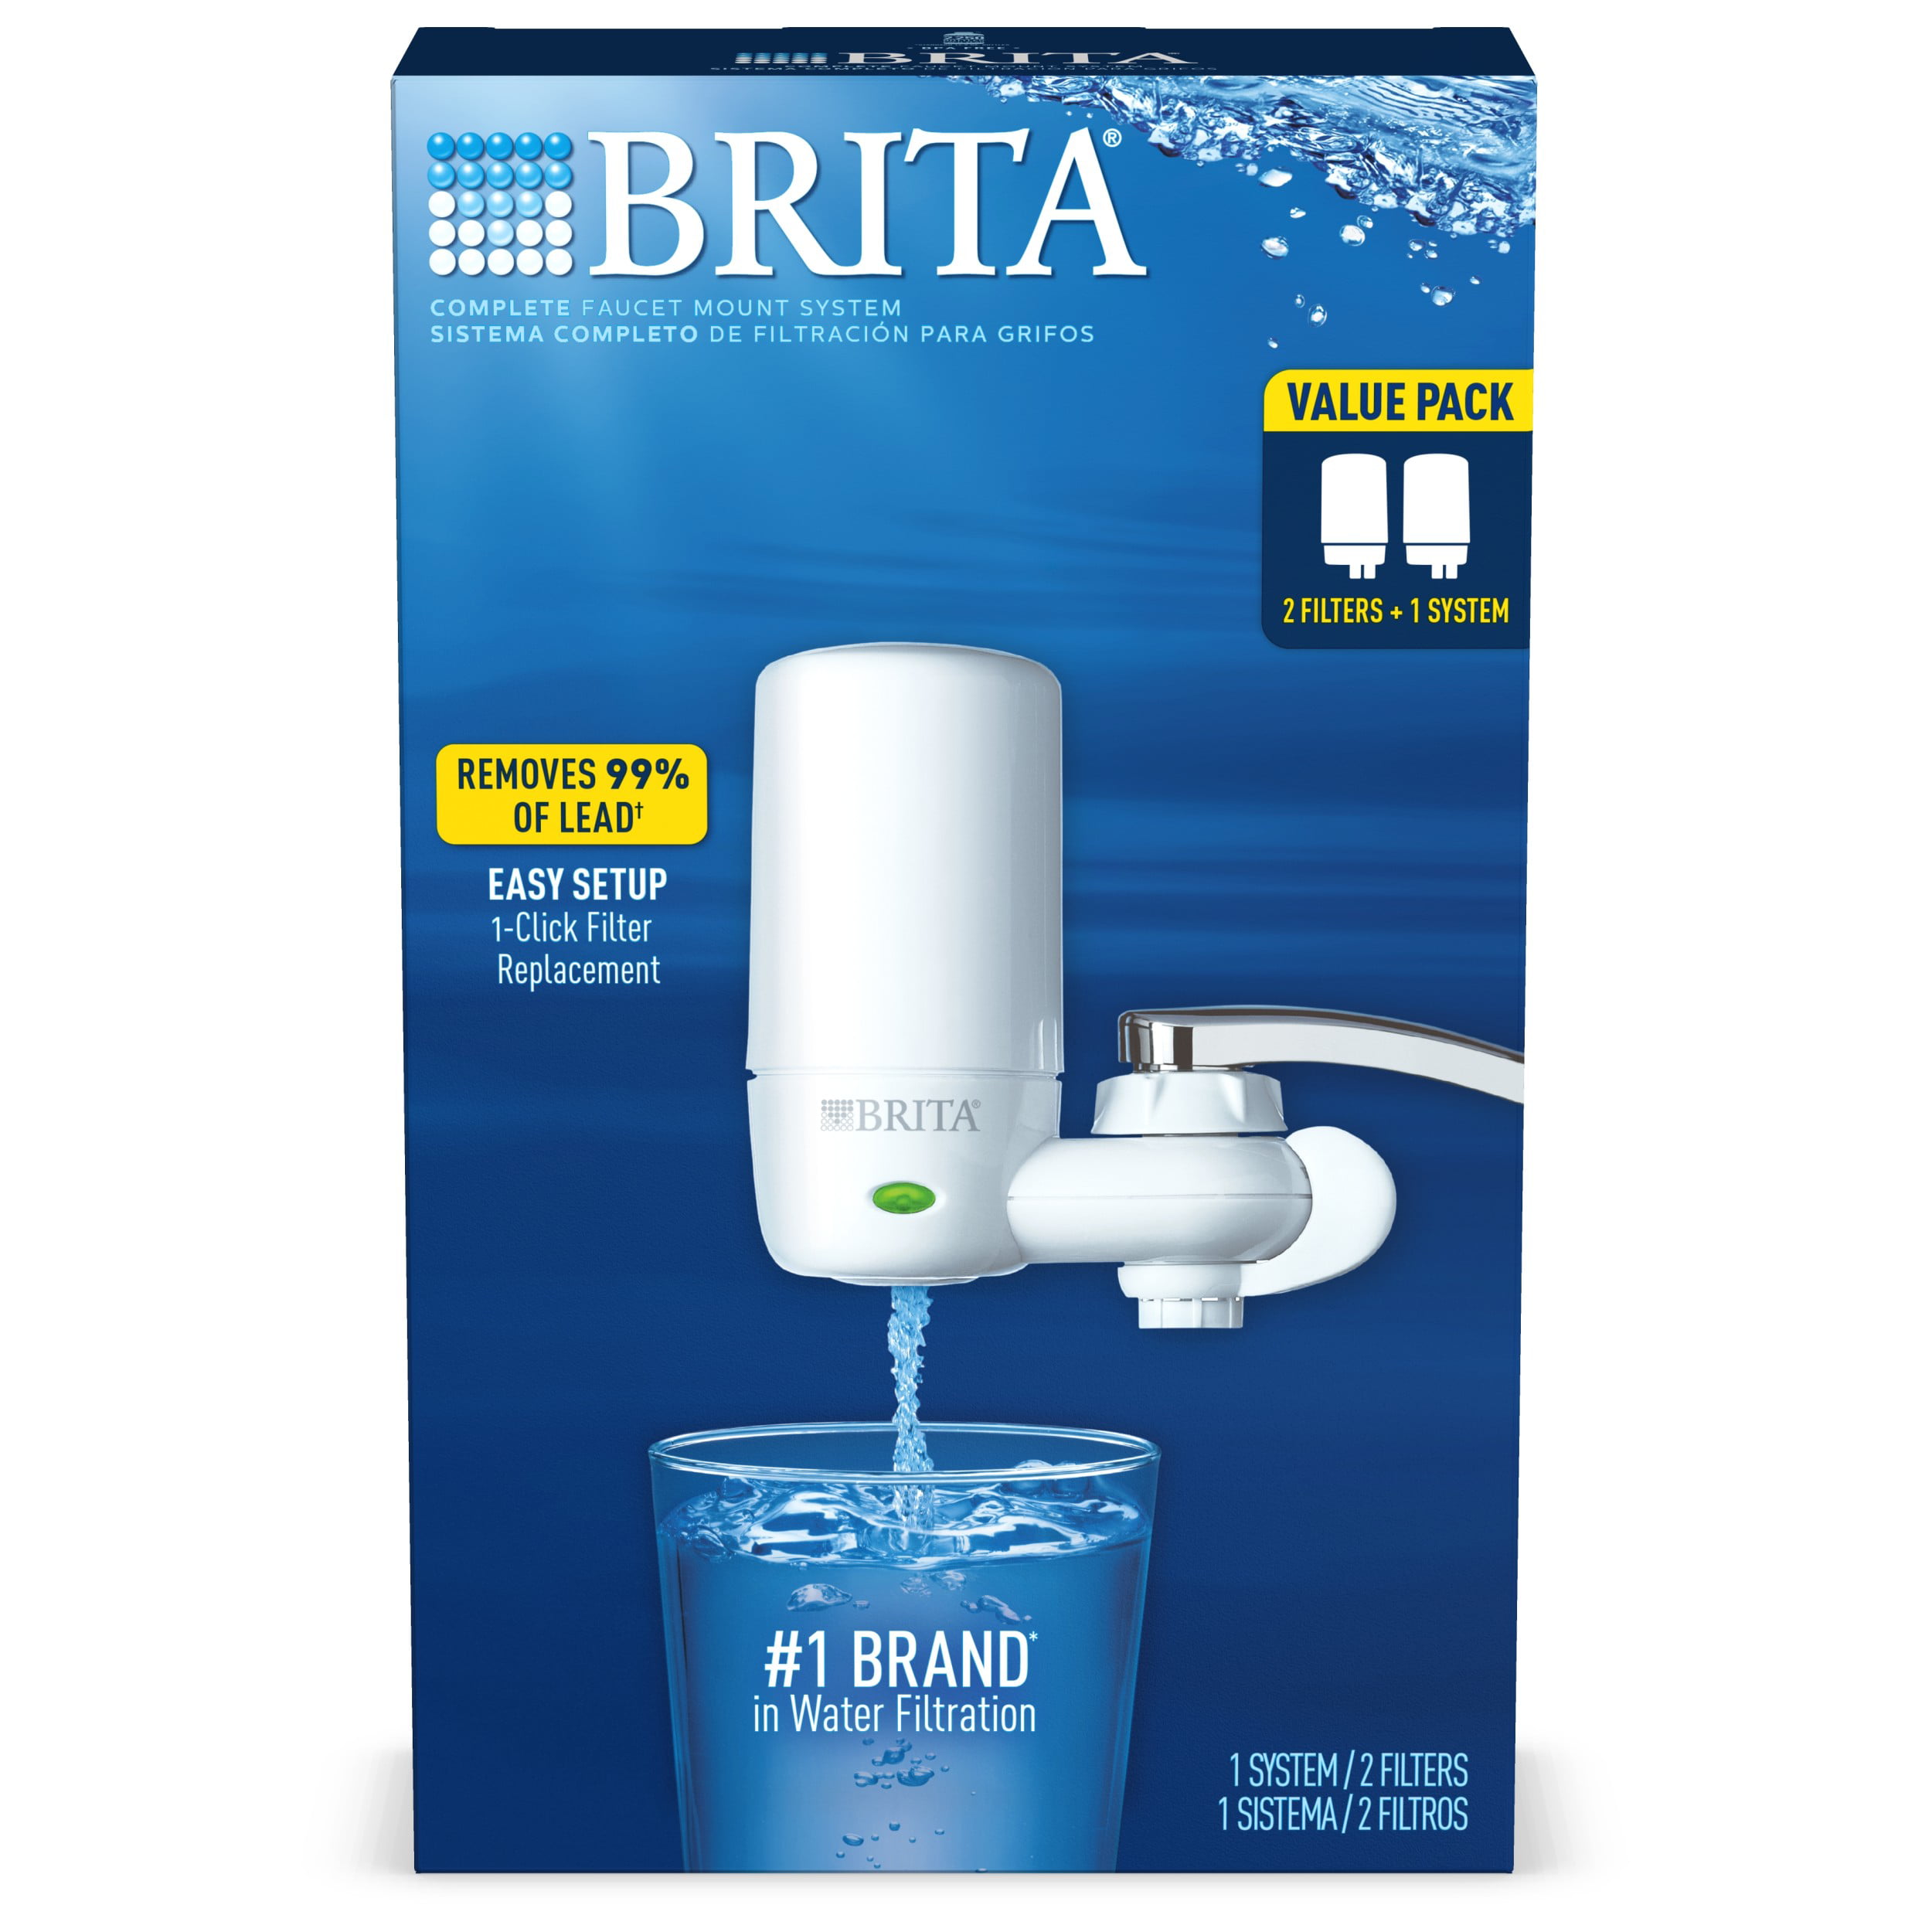 brita-complete-tap-water-faucet-filtration-system-value-pack-white